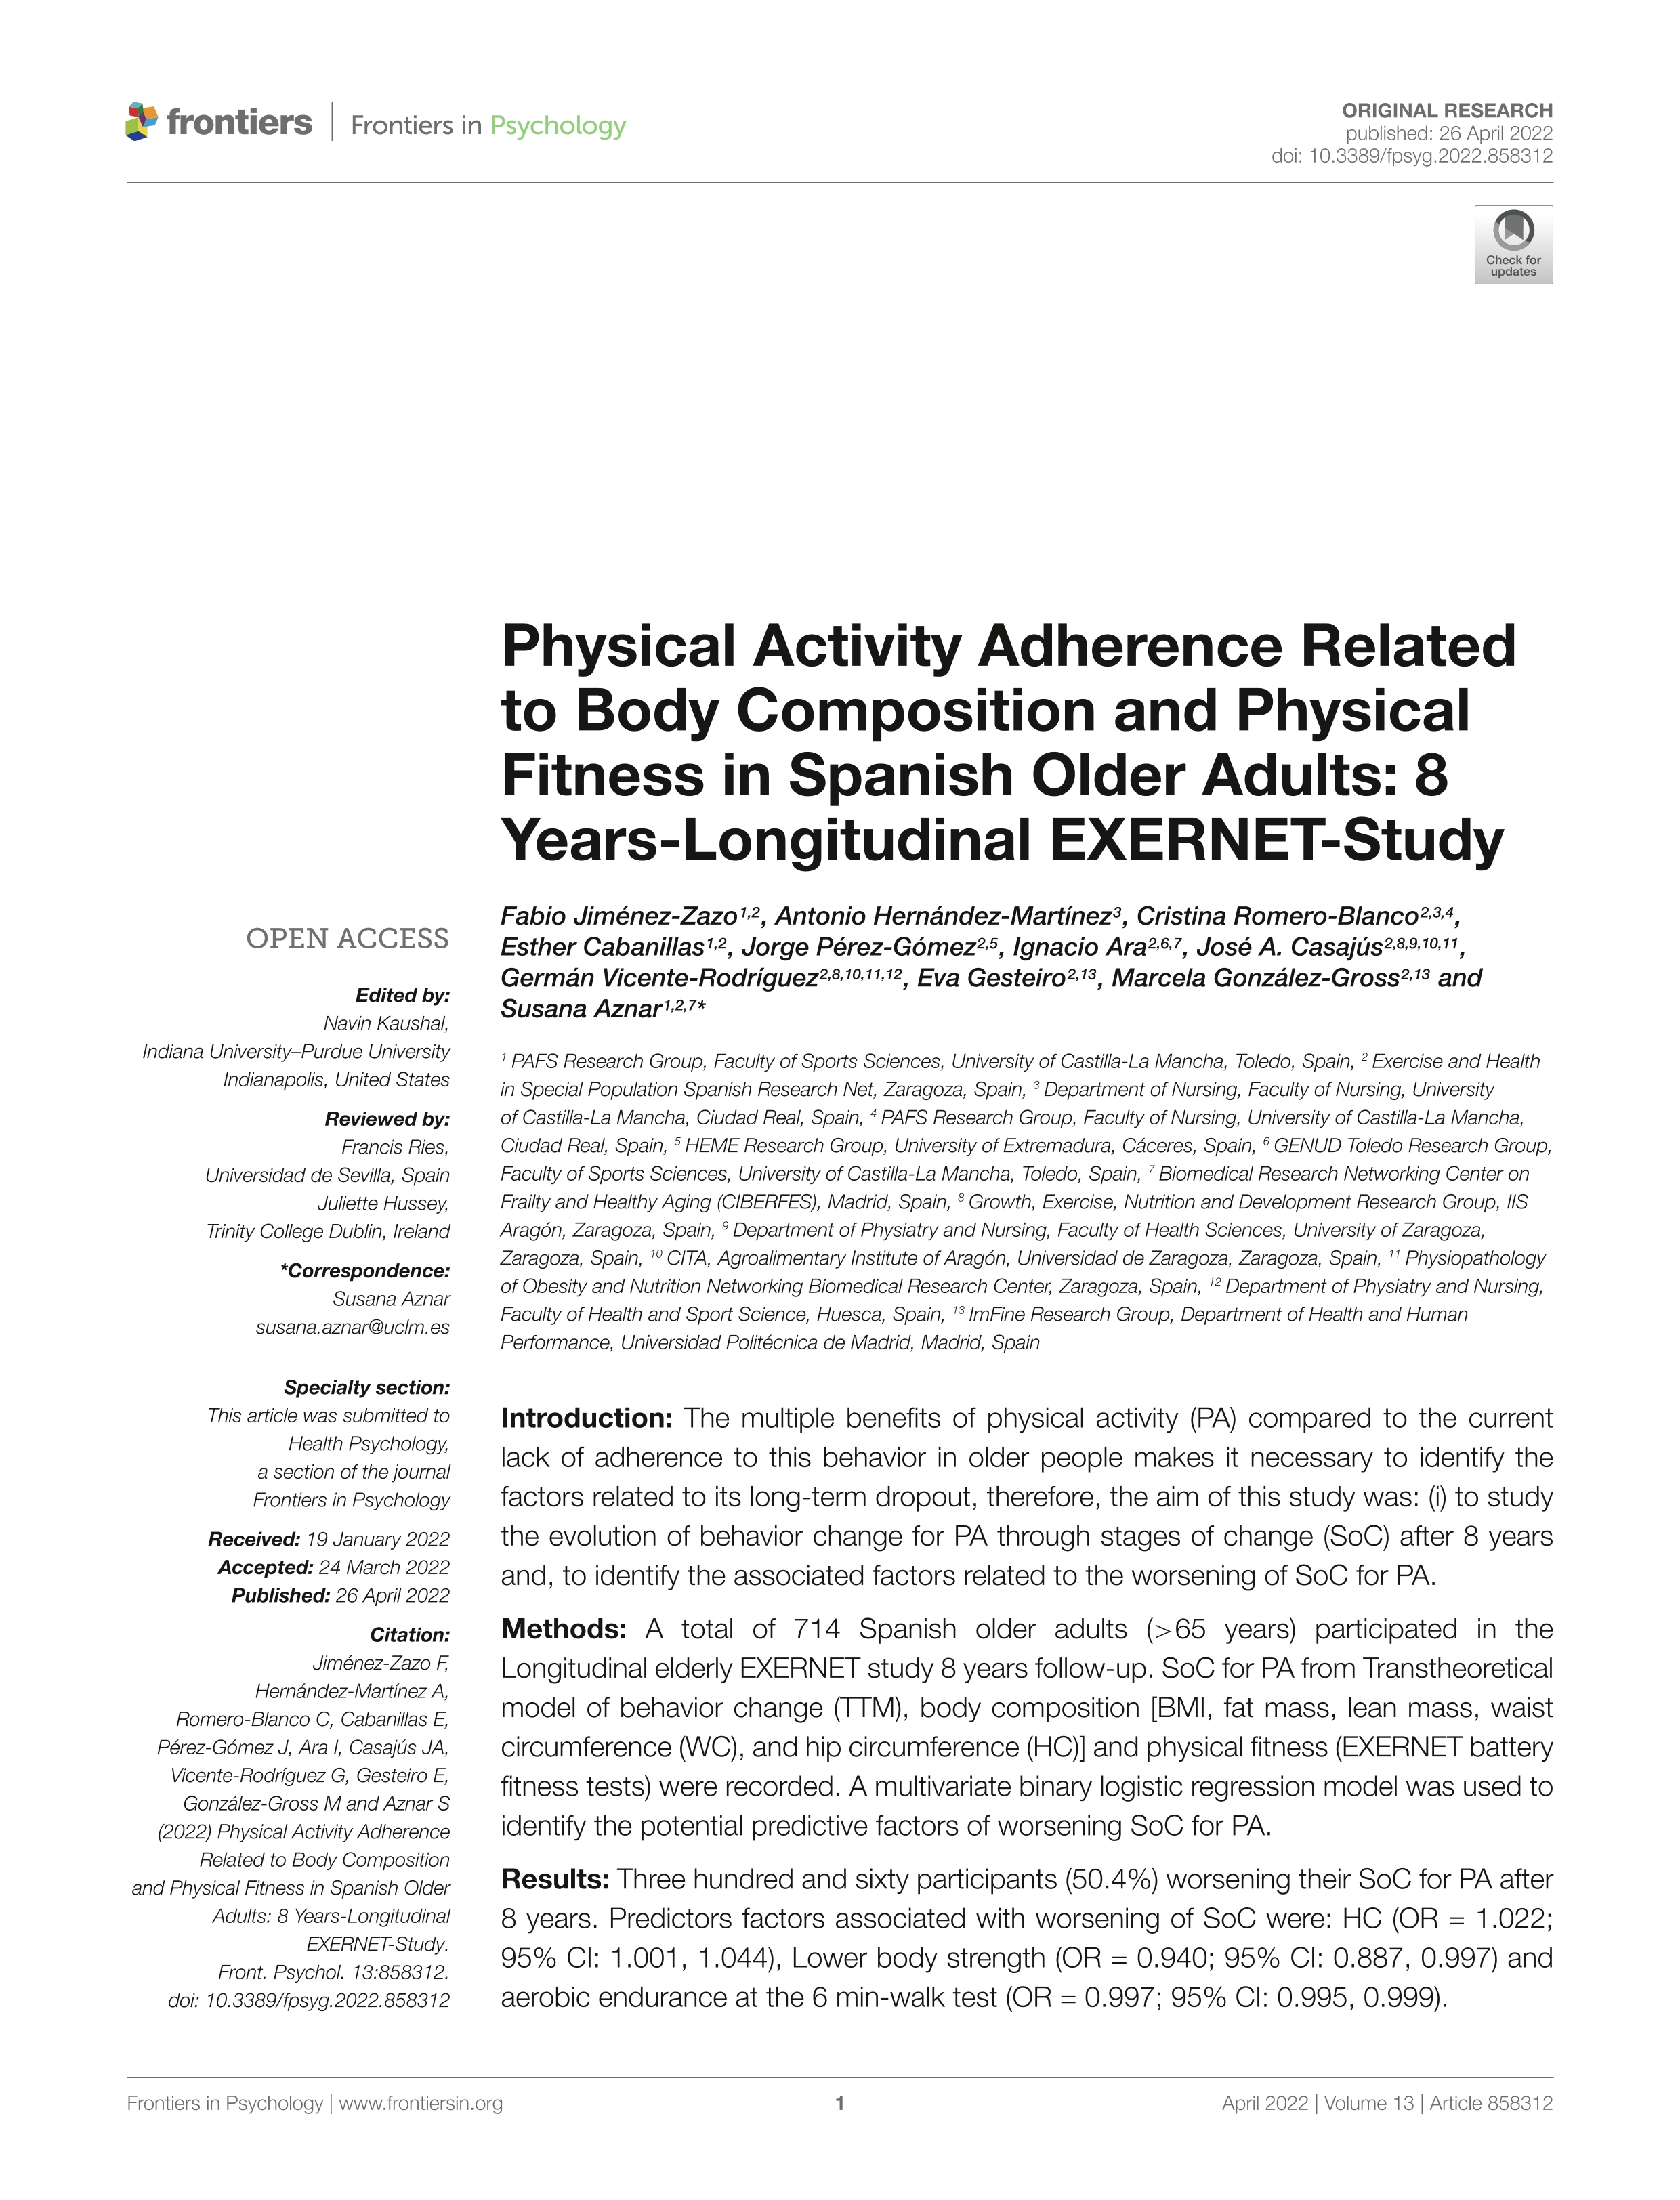 Physical Activity Adherence Related to Body Composition and Physical Fitness in Spanish Older Adults: 8 Years-Longitudinal EXERNET-Study